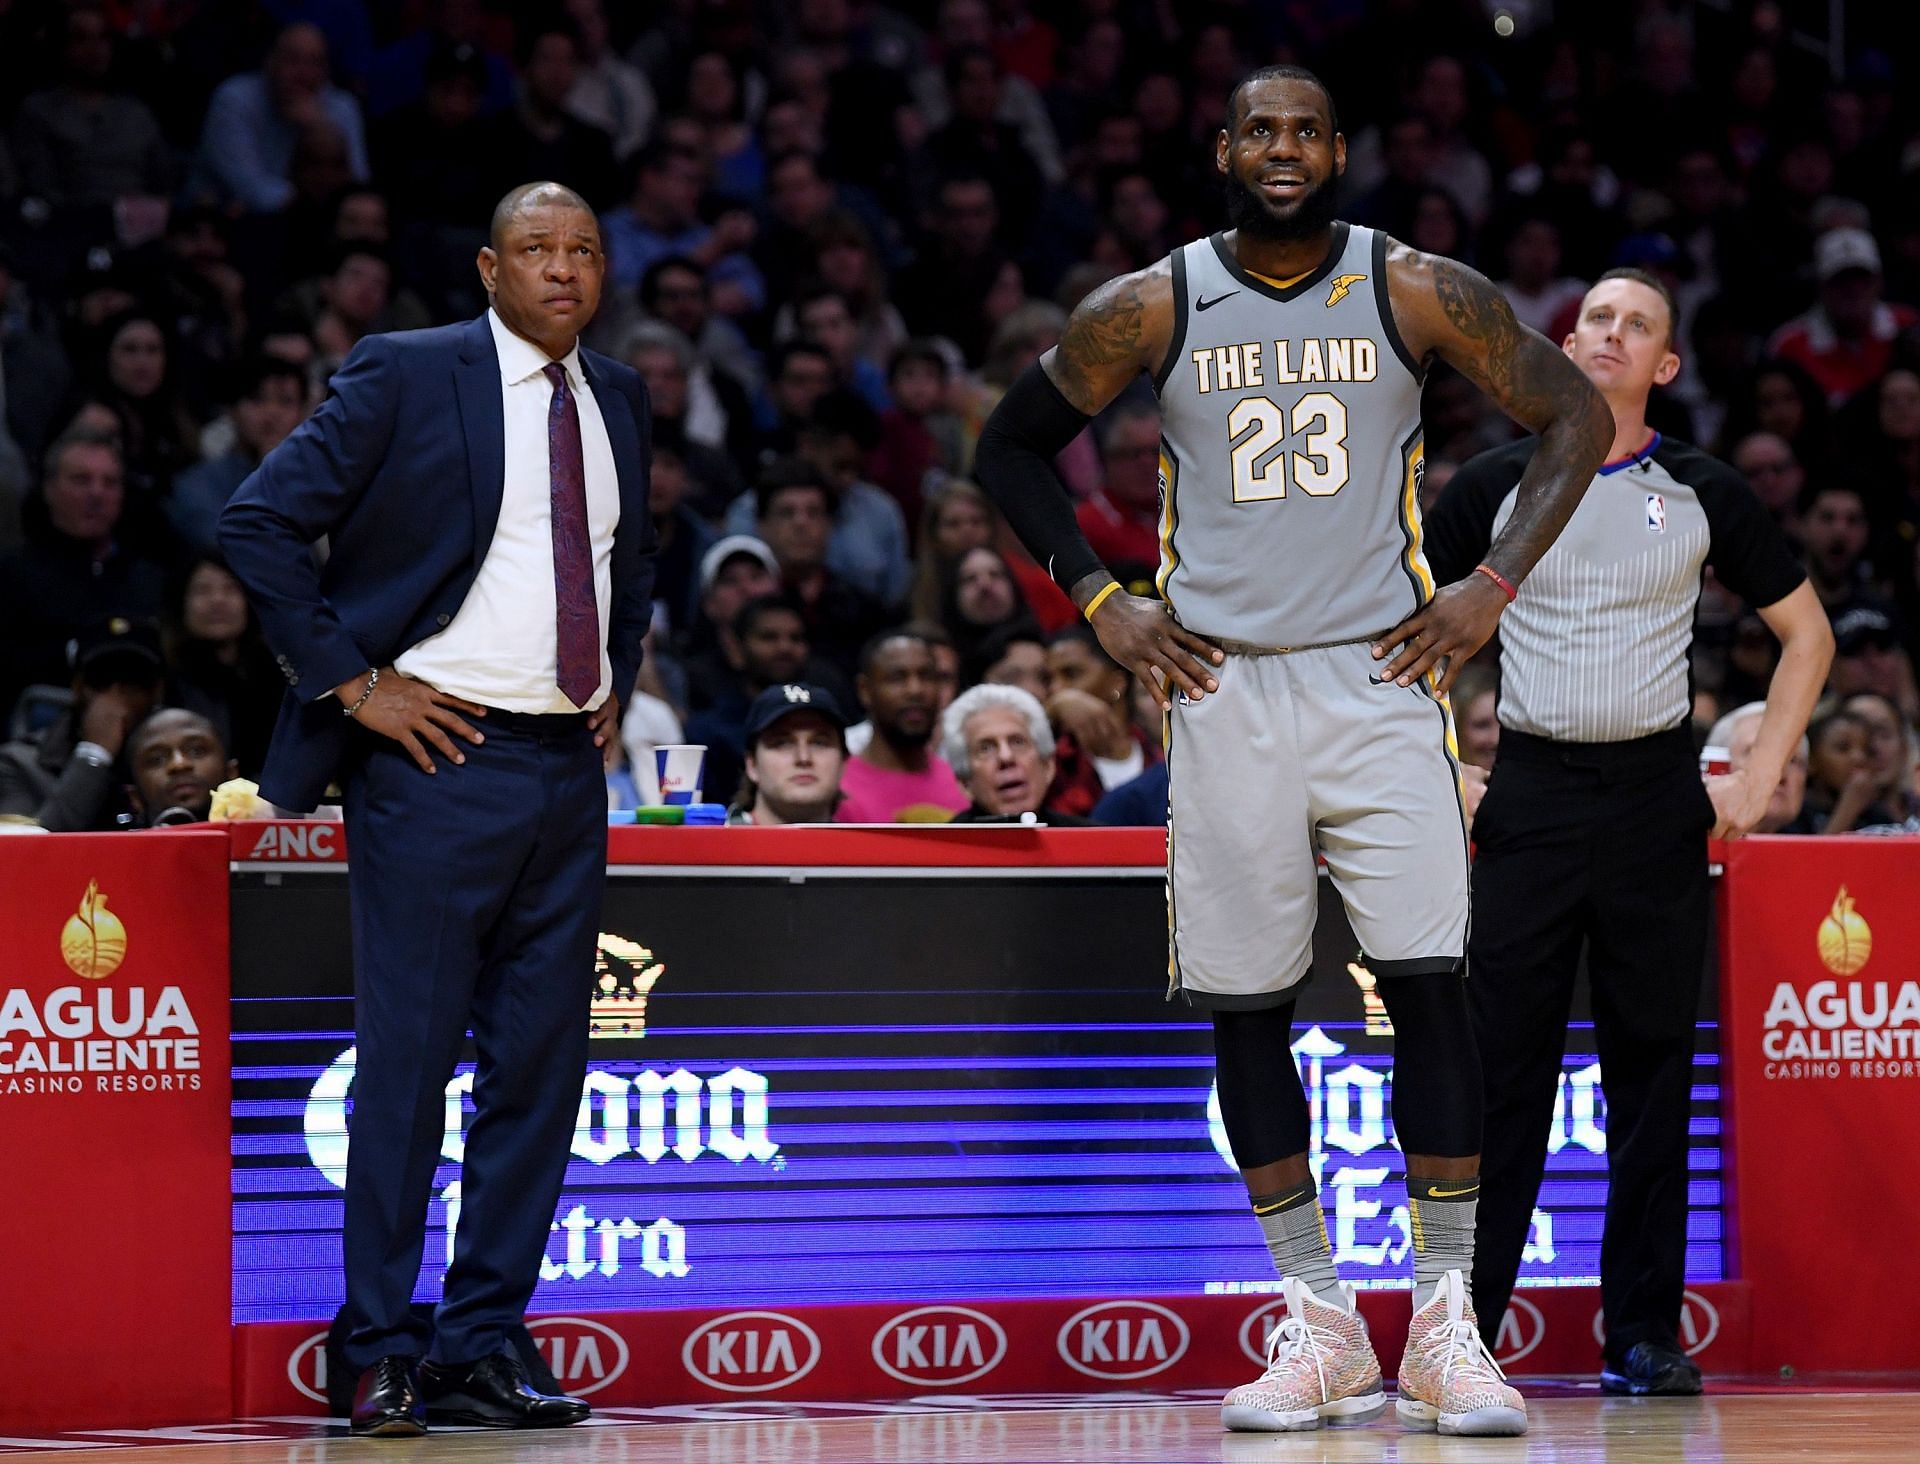 LeBron James with the Cleveland Cavaliers in 2018 alongside then LA Clippers head coach Doc Rivers.